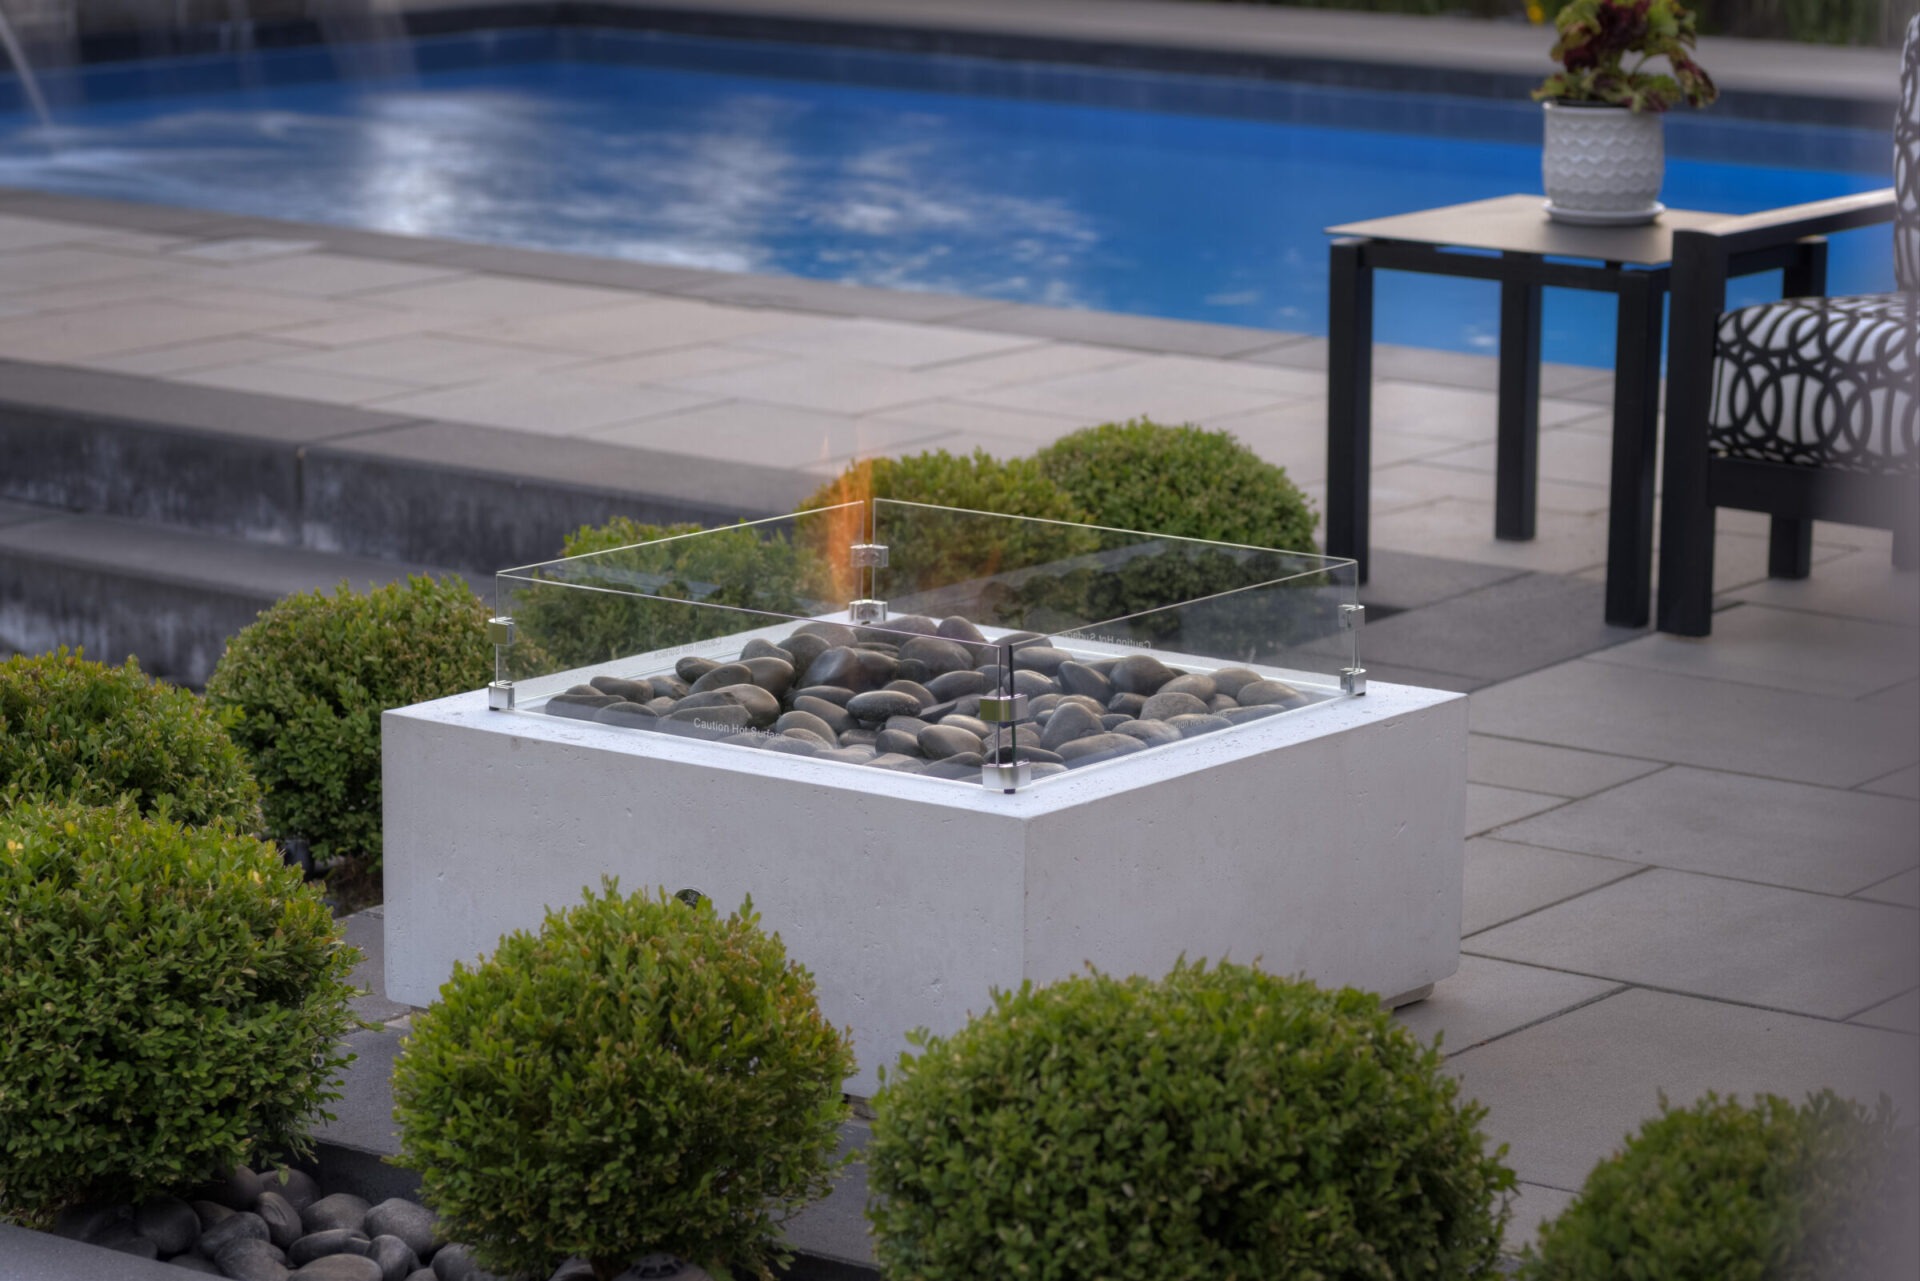 An outdoor fire pit with glass shield sits on a patio, surrounded by shrubs, with a pool and outdoor furniture in the background.